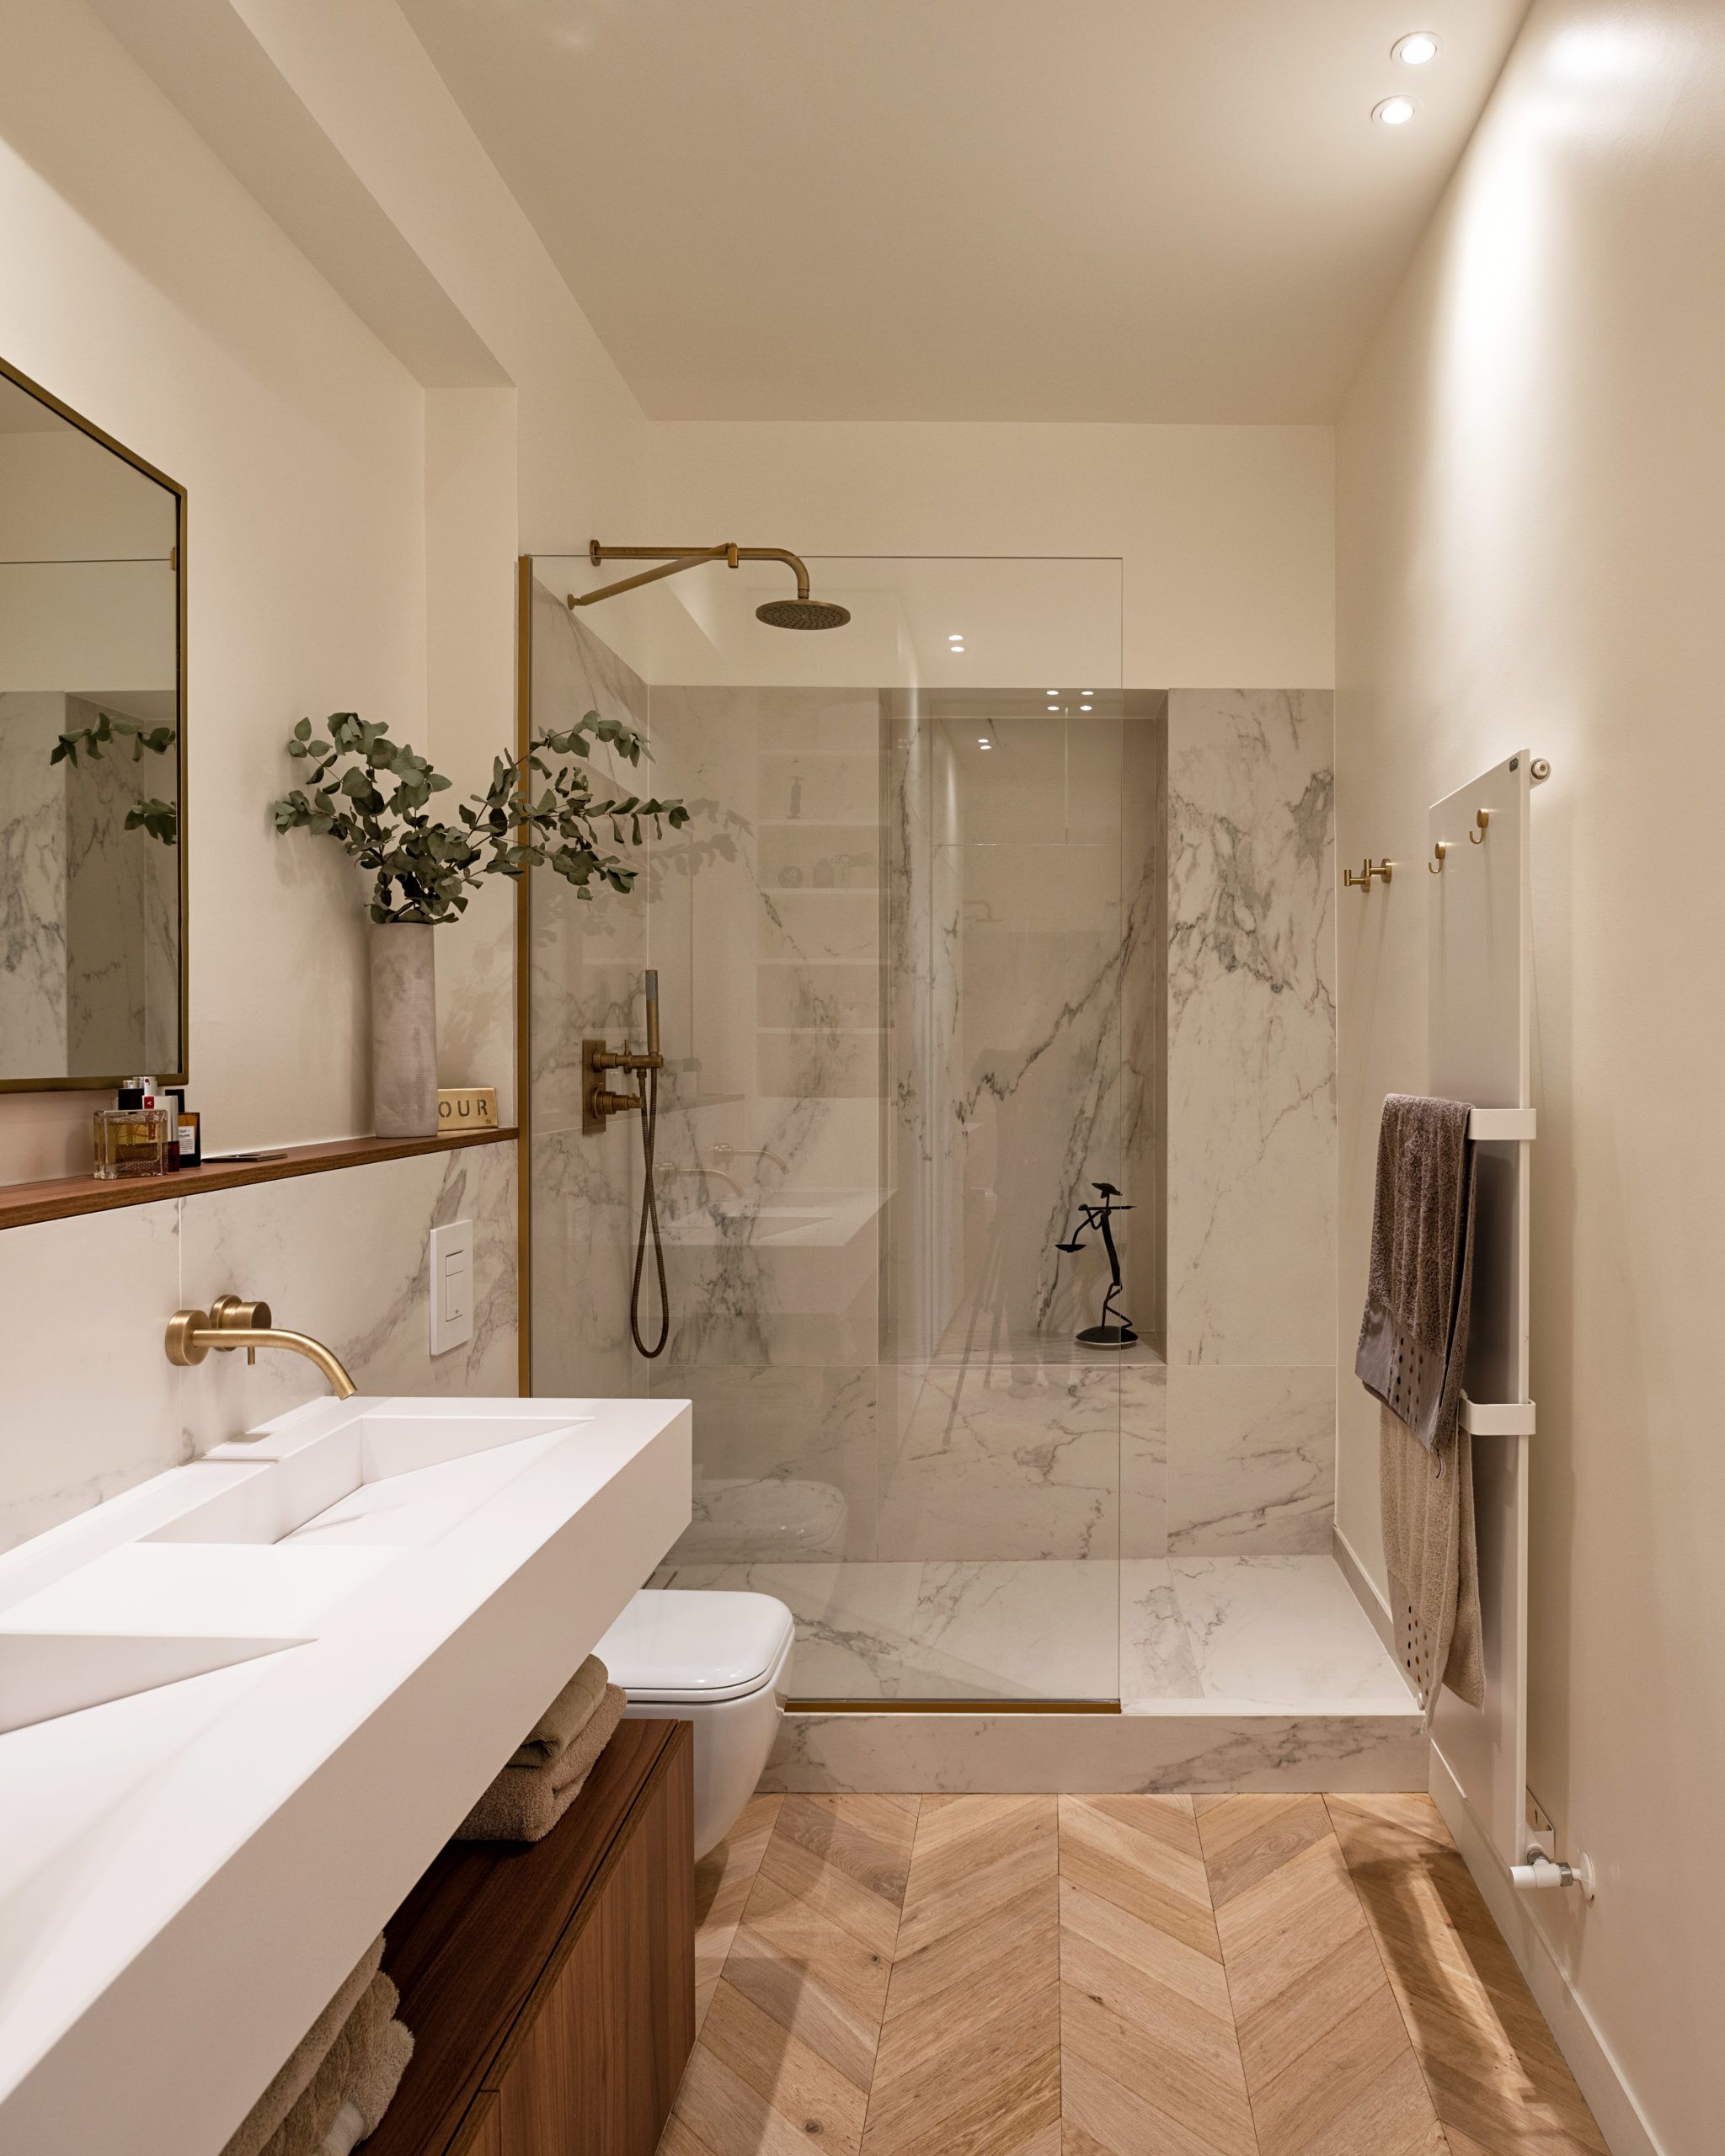 Majestic bathroom styles that gives a
  beautiful look